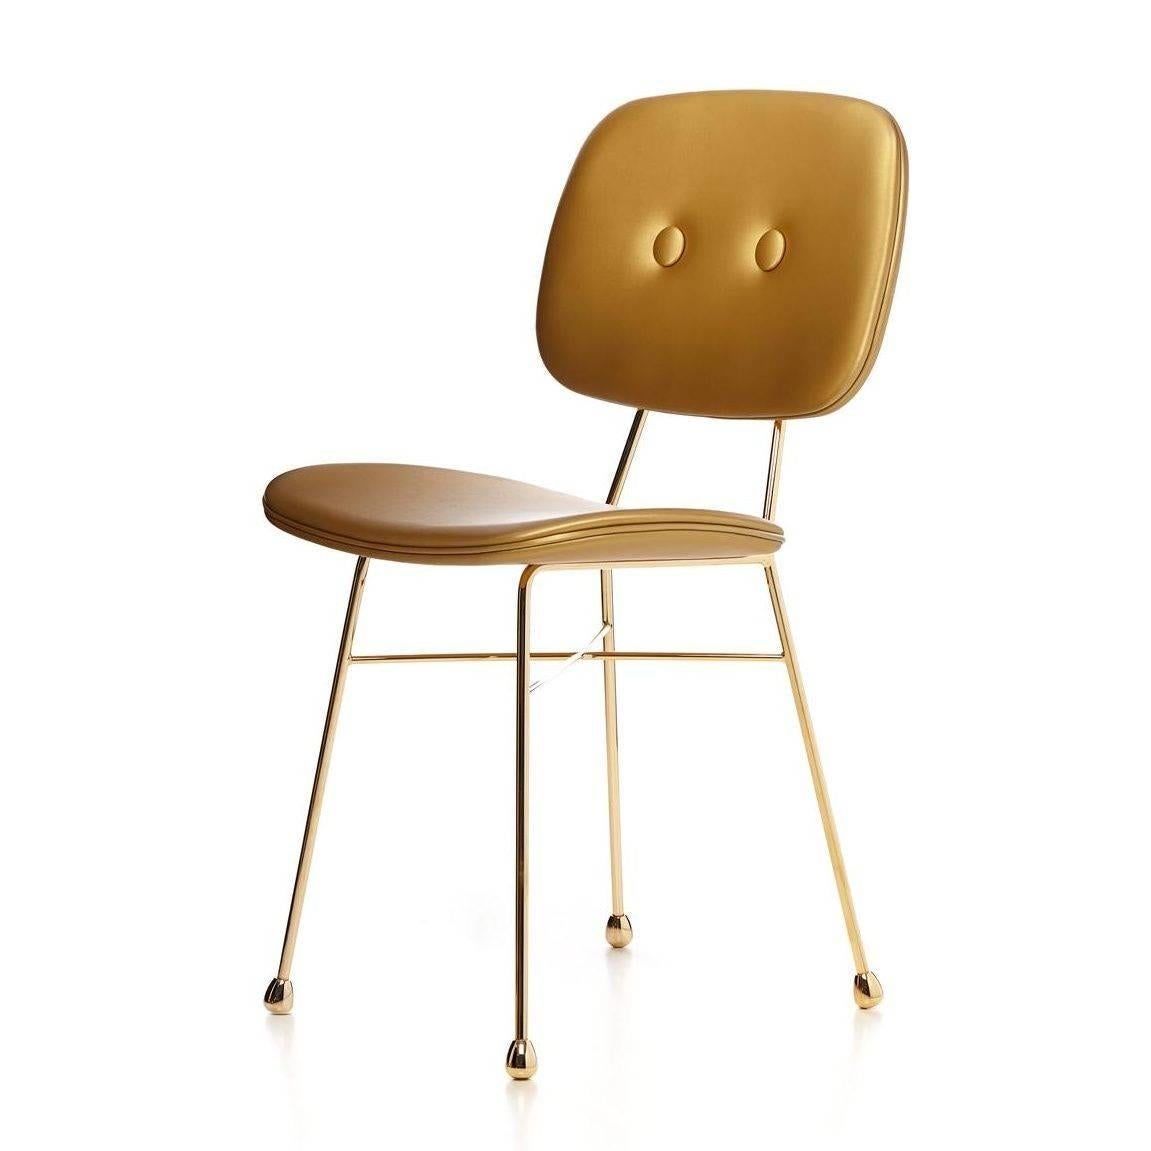 Under a mysterious magic spell, a retro-looking school chair is dipped in enchanted golden nectar, which washes away its austerity and crows it with a shiny aureole. Isn’t this a typical school-time wish, while looking out of the window and hoping